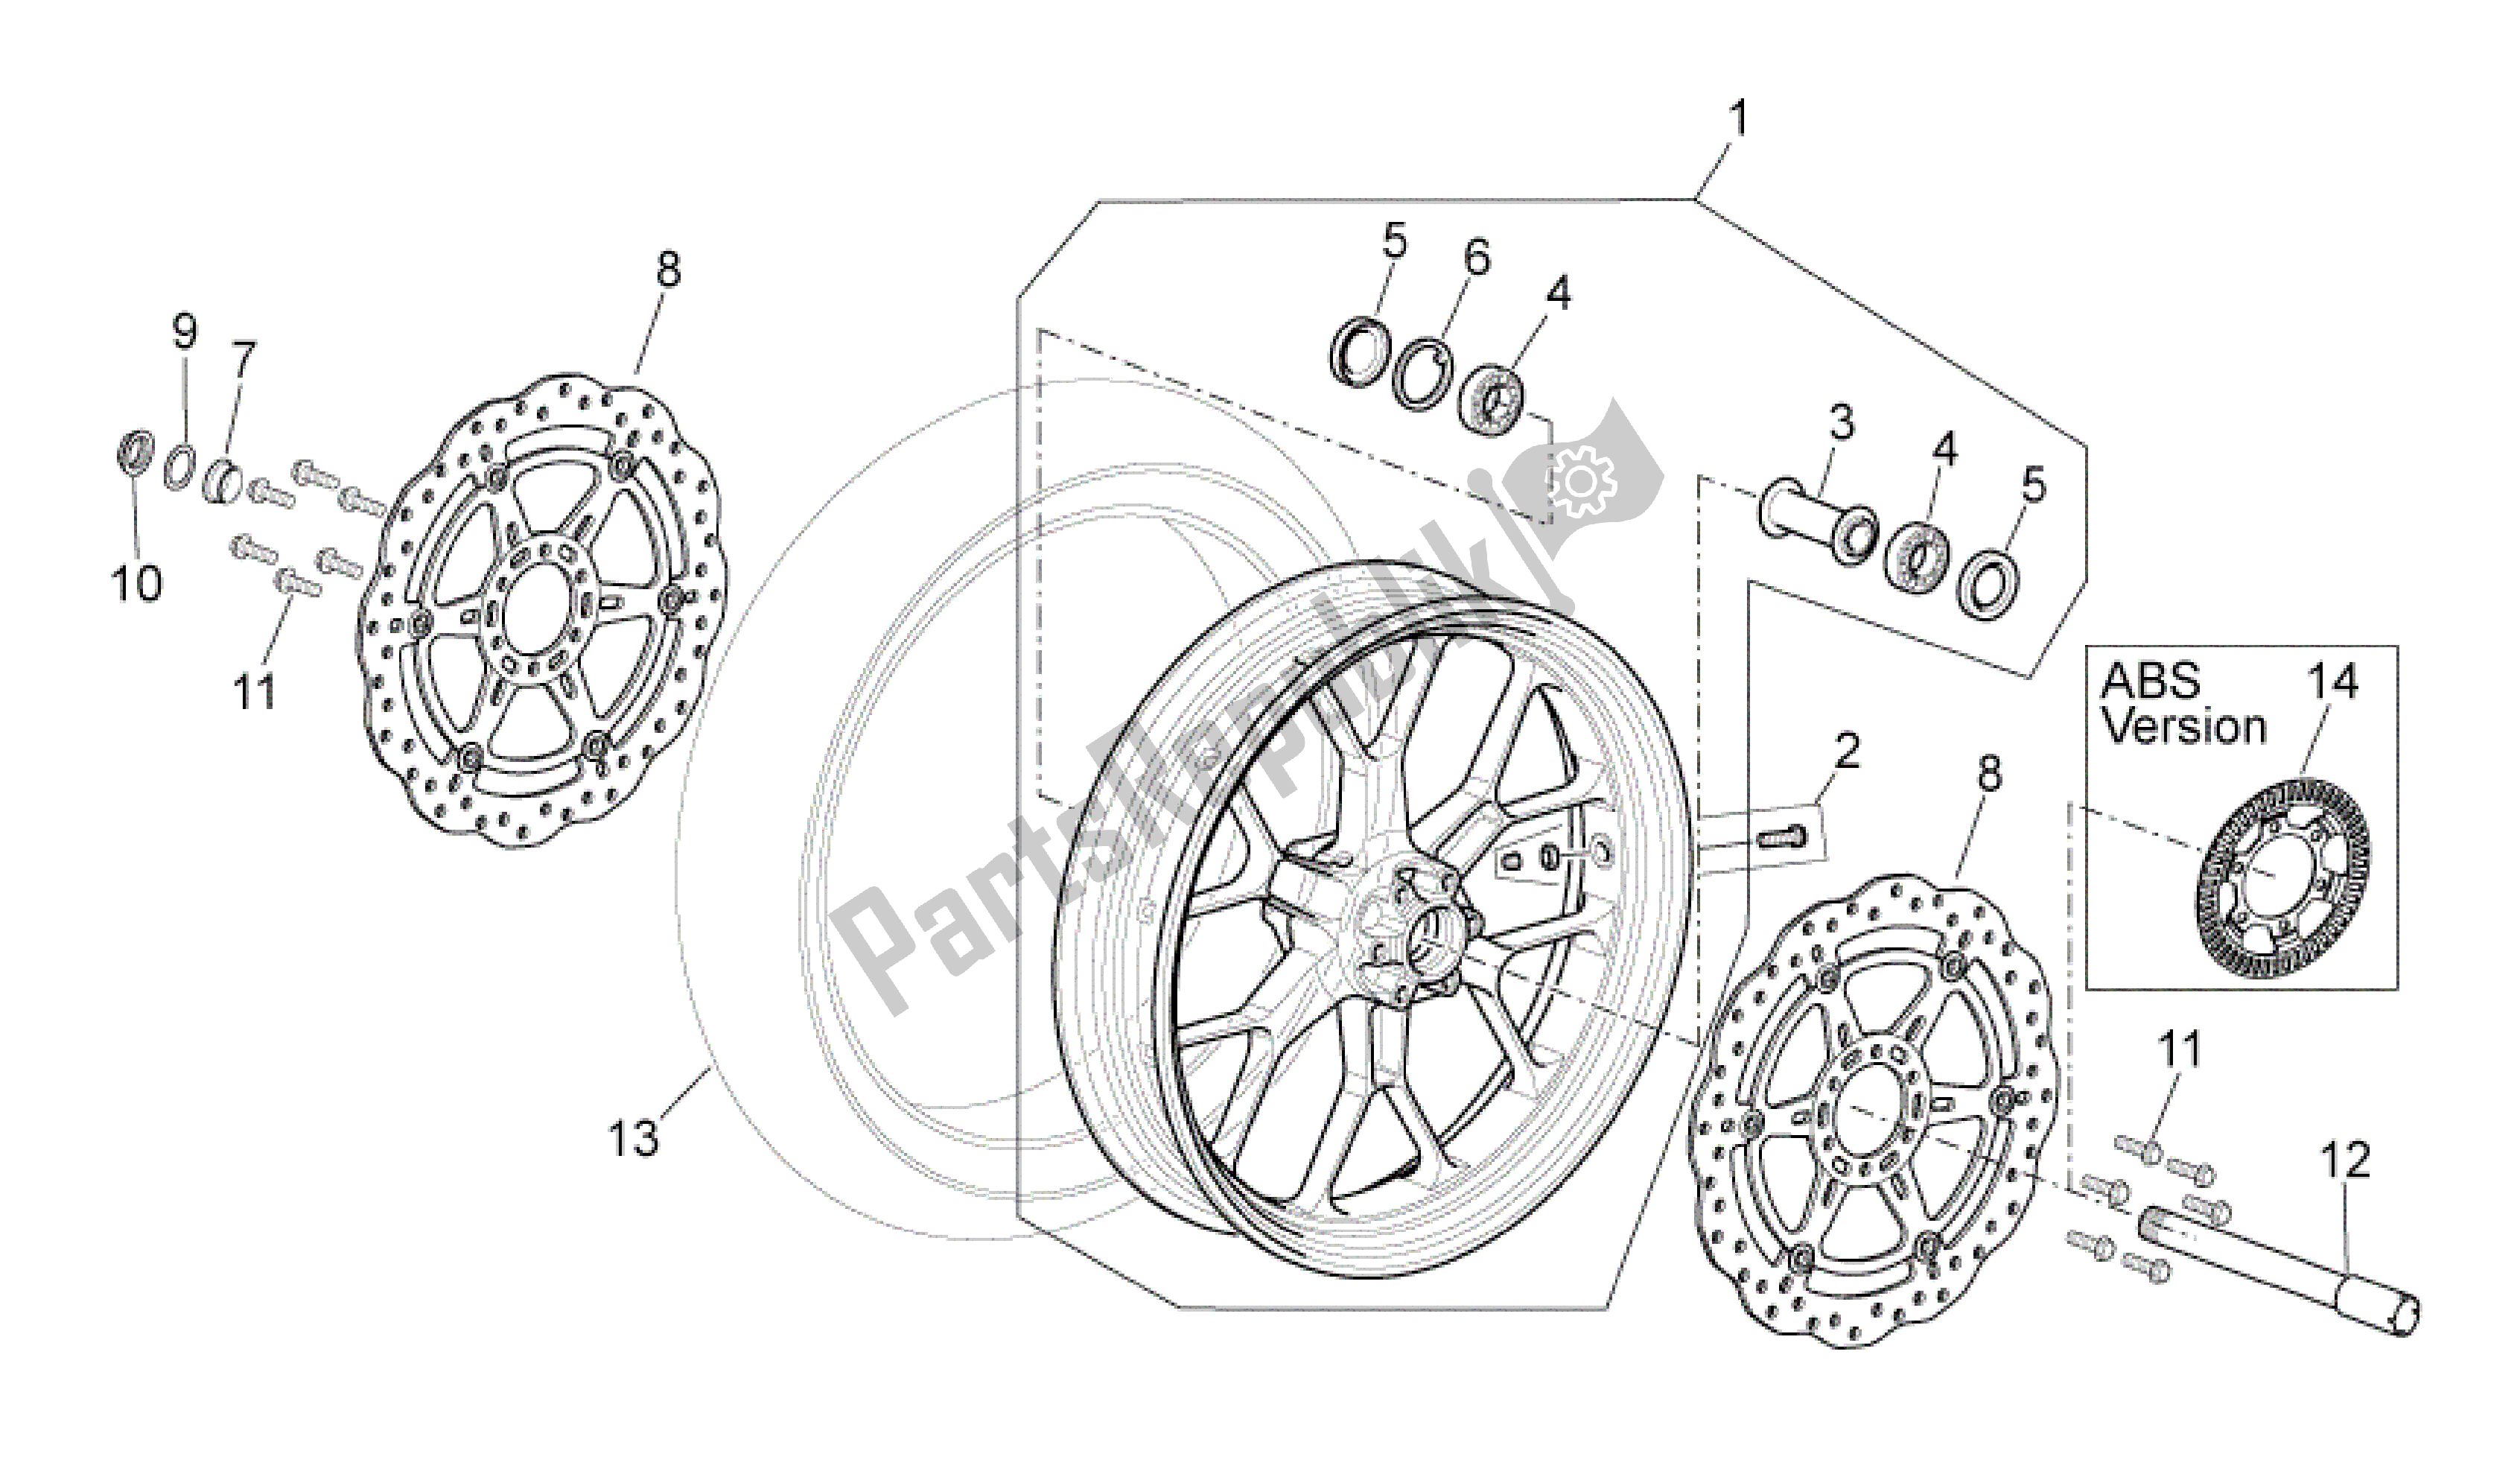 All parts for the Front Wheel of the Aprilia Shiver 750 2011 - 2013